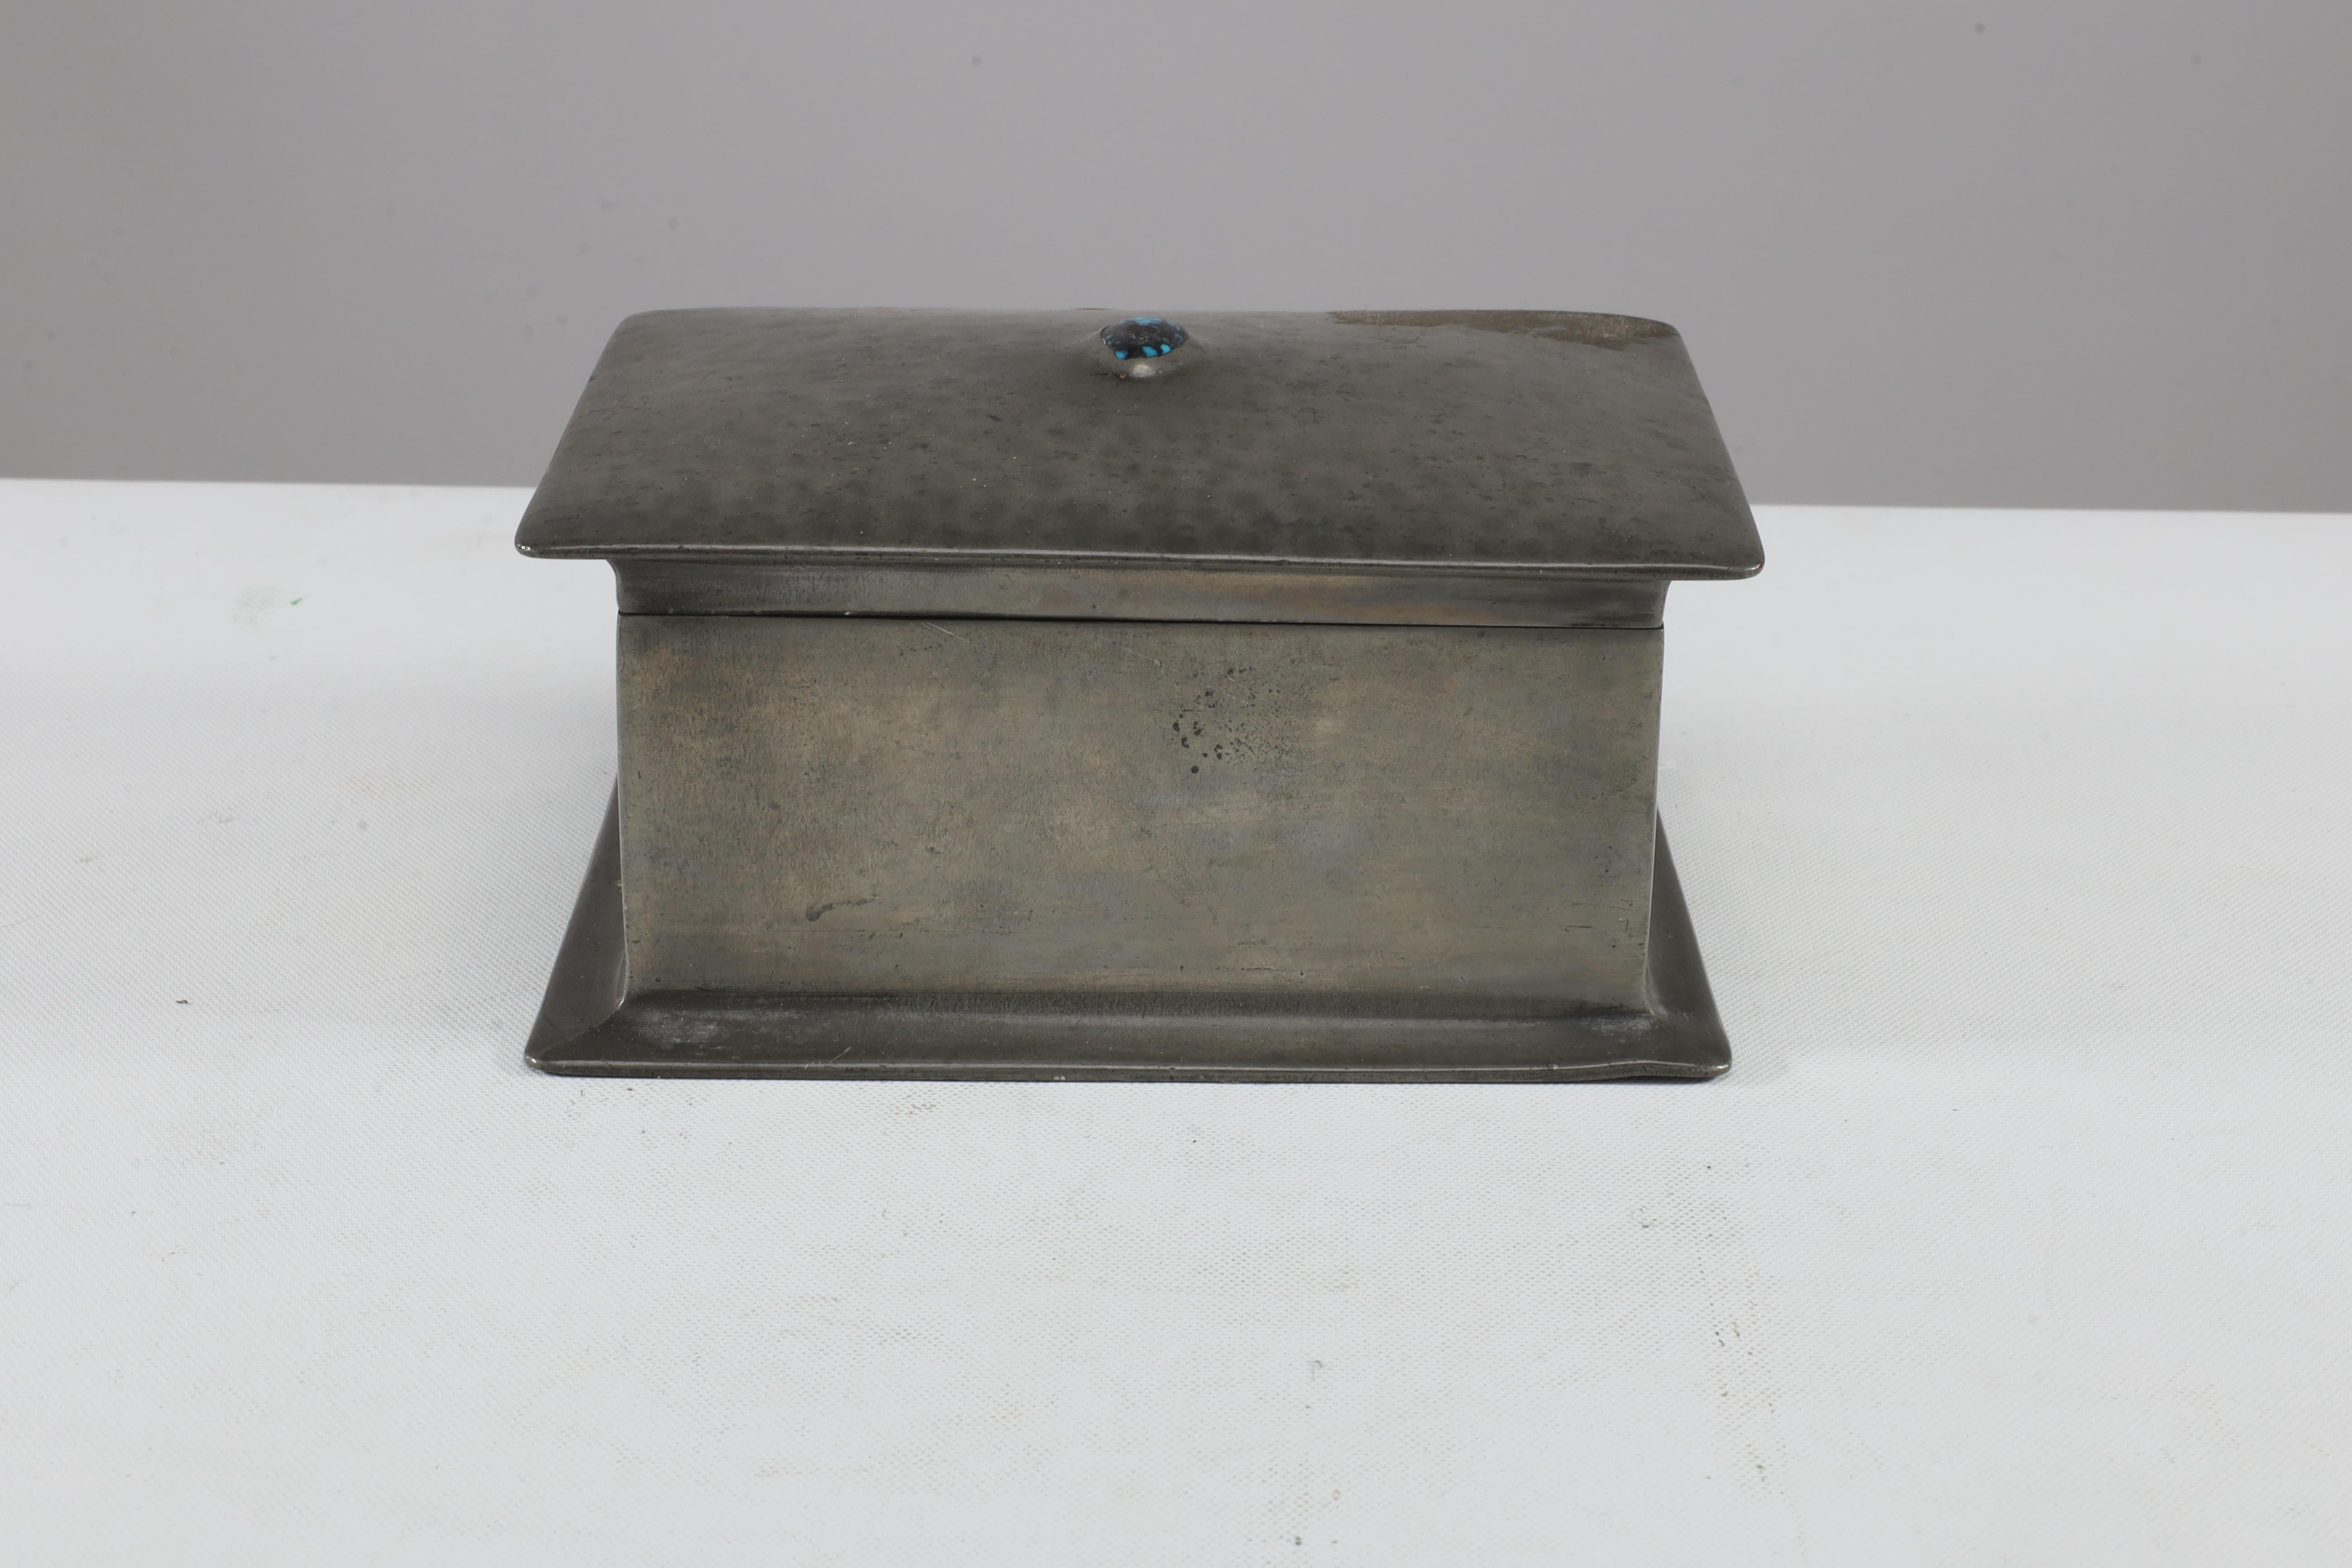 Liberty & Co. An Arts & Crafts ceder lined pewter jewelry box with an Abalone blue semi-precious stone to the lid. Tudric 082 stamped to base. Liberty launched its Tudric pewter range in 1902.Initially, Liberty imported as well as commissioned items